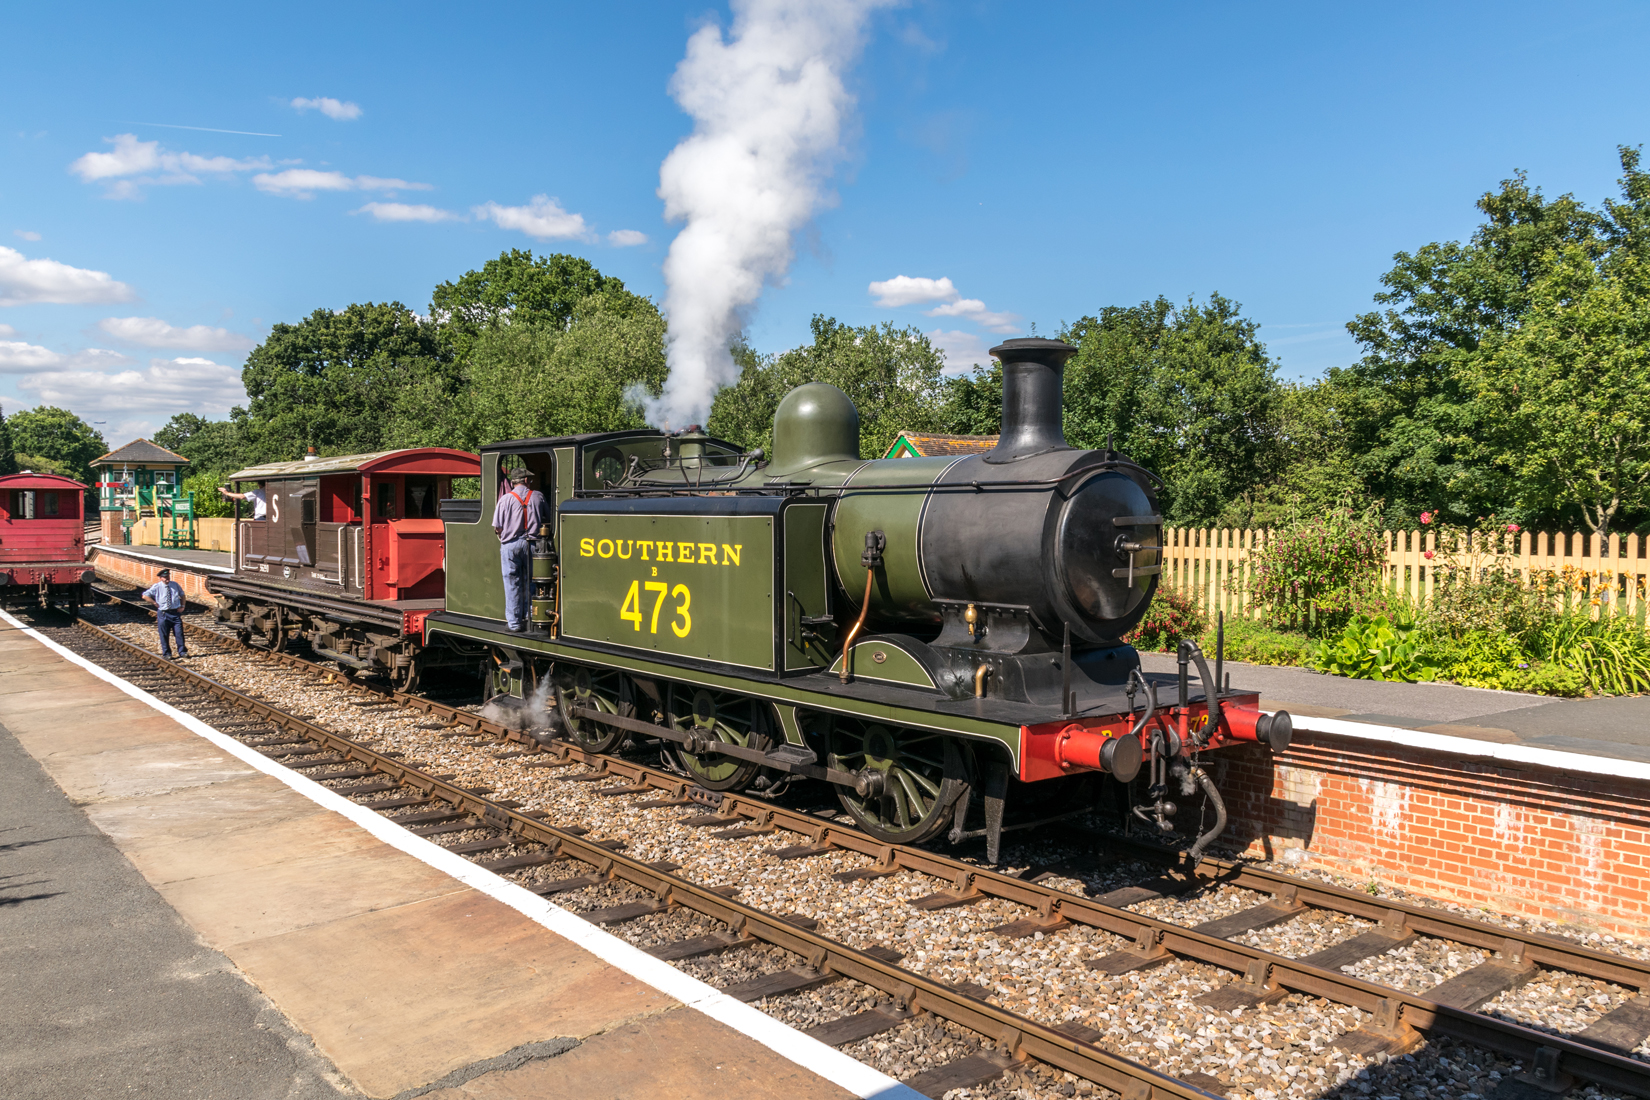 B473 completes the first part of its shunting activities to reconfigure the goods train at Kingscote